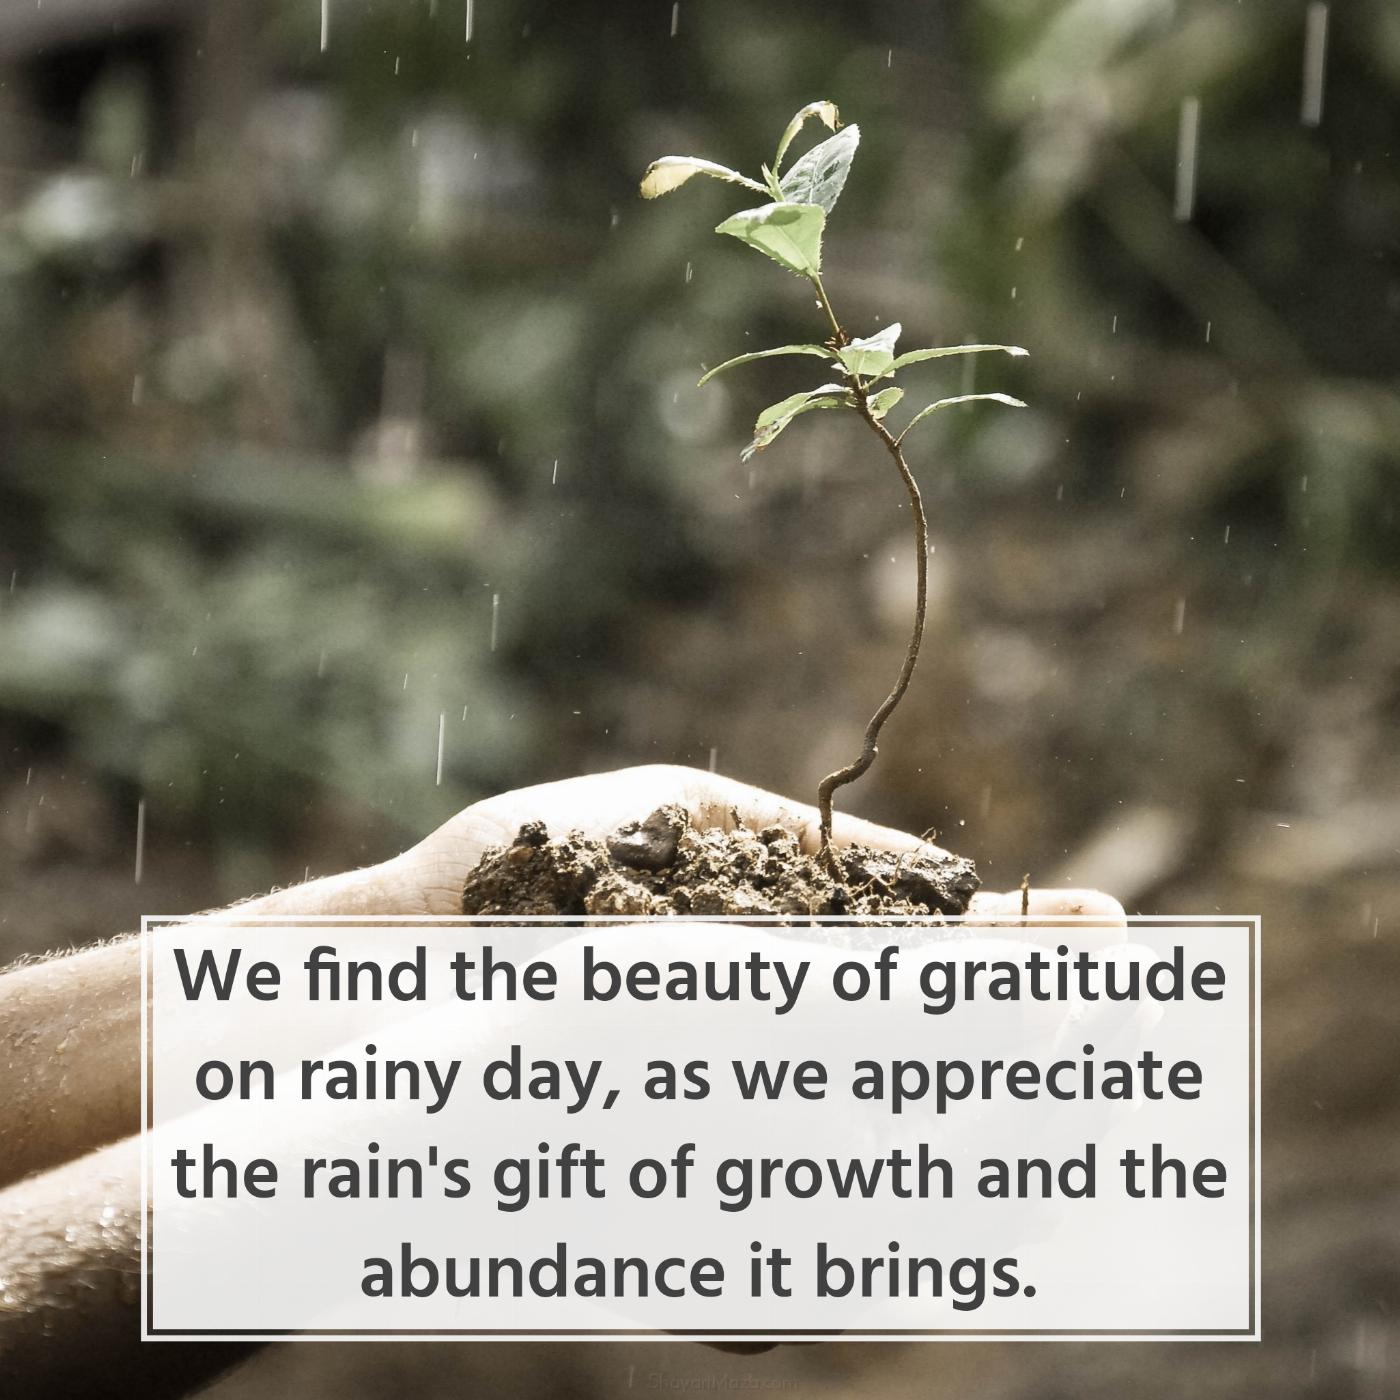 We find the beauty of gratitude on rainy day